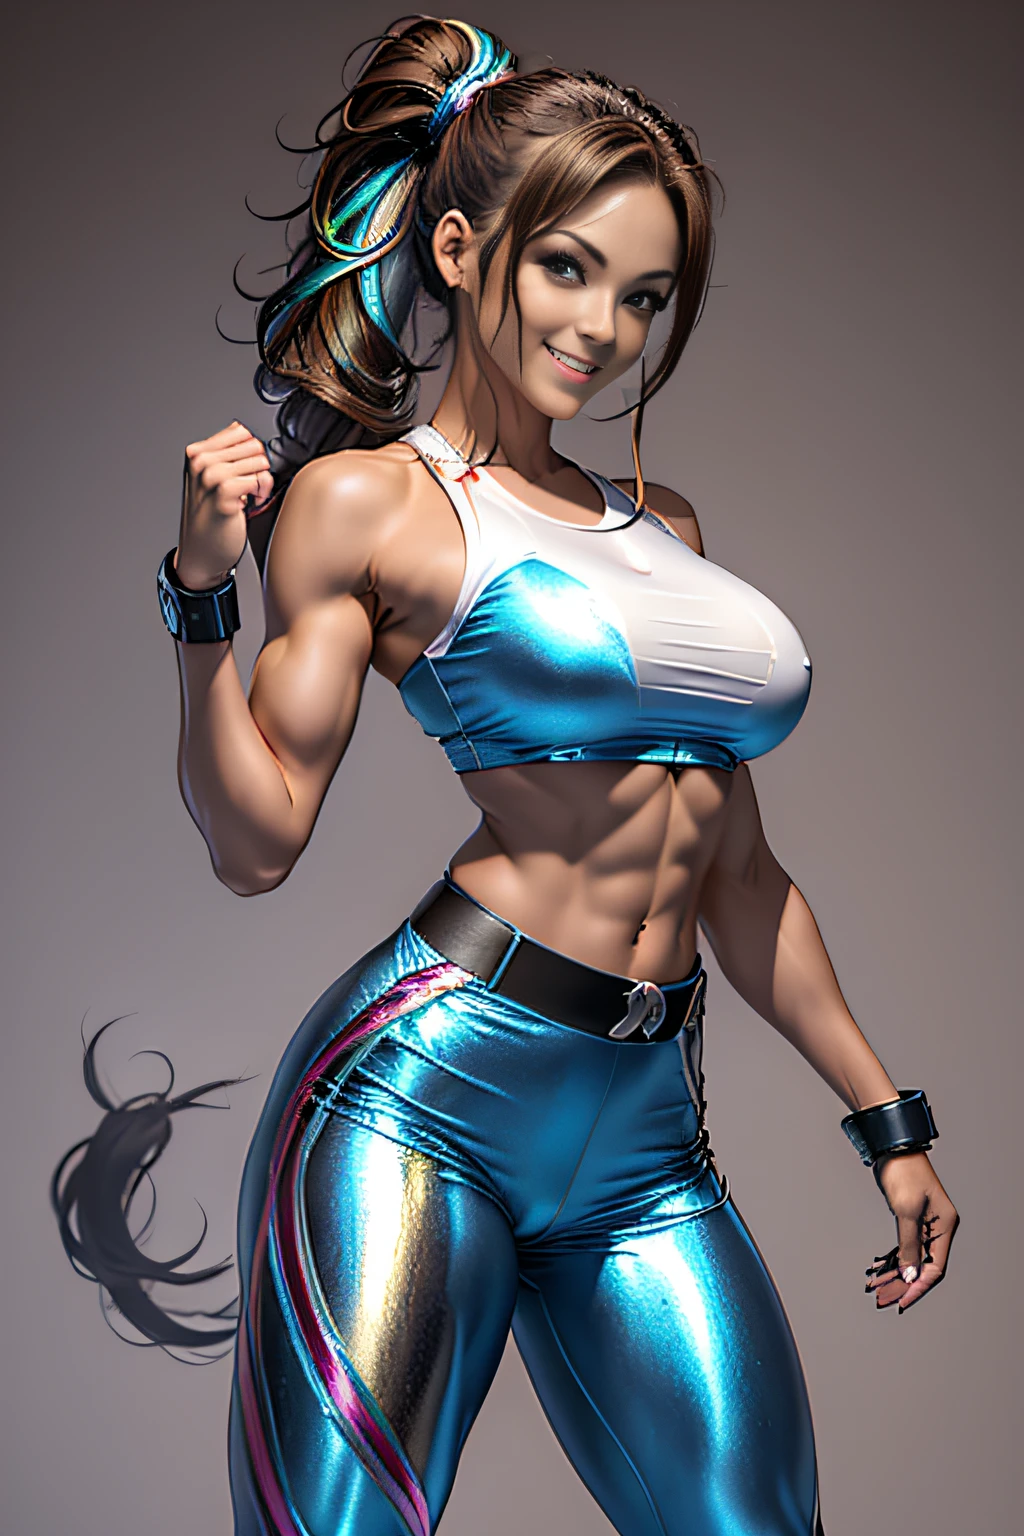 Arafe woman solo with ponytail hair、Fighting Game Fightetness Model、Big breasts about to burst、No exposed skin、Metallic Light Rainbow Combat Suit、thin and long legs,、Fitness Body Shape、half-pants、White belt、Pose ready to fight、Mischievous smile